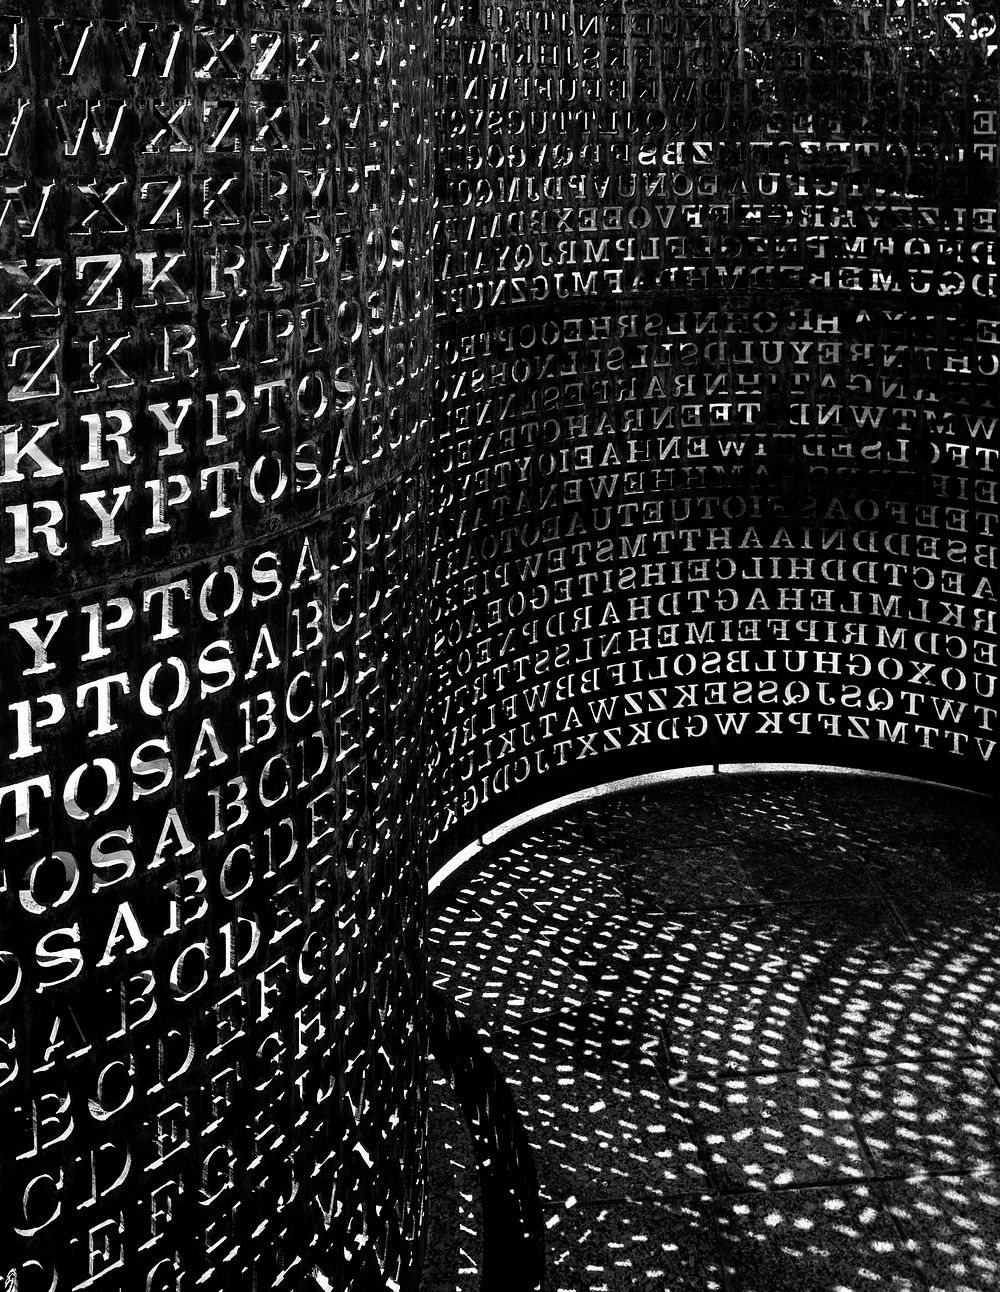 Art made of "code" named Kryptos sits on the grounds of the C.I.A. Headquarters in Virginia. Original image from Carol M.…